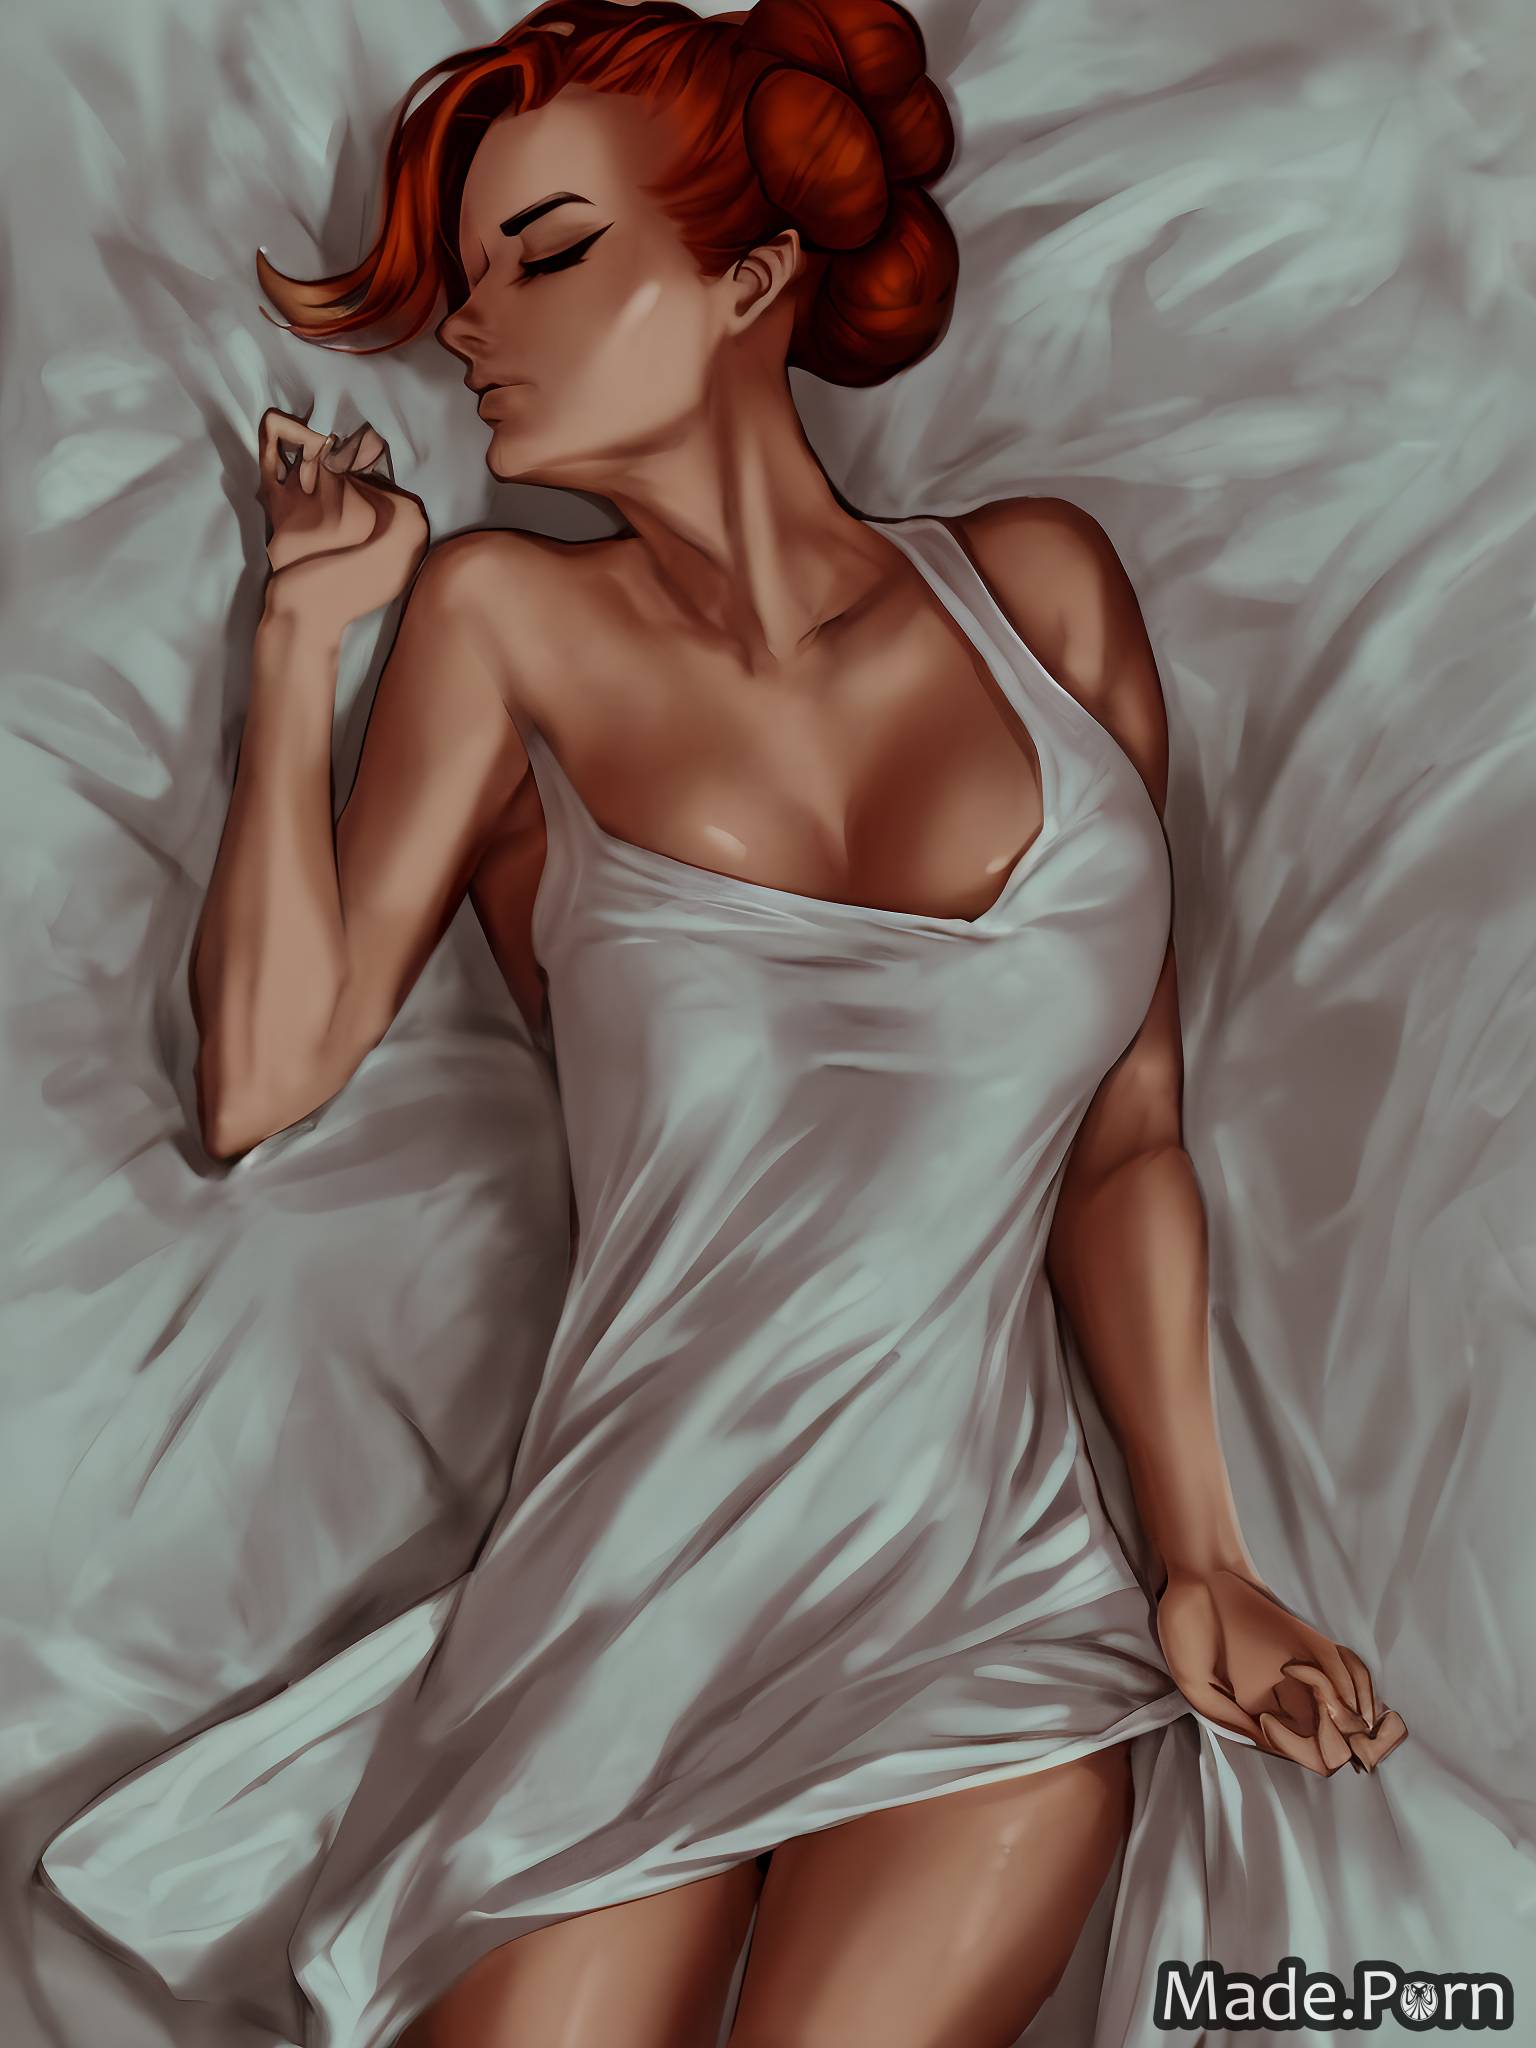 1536px x 2048px - Porn image of sunset angry sleeping cartoon nightgown babe ginger created  by AI